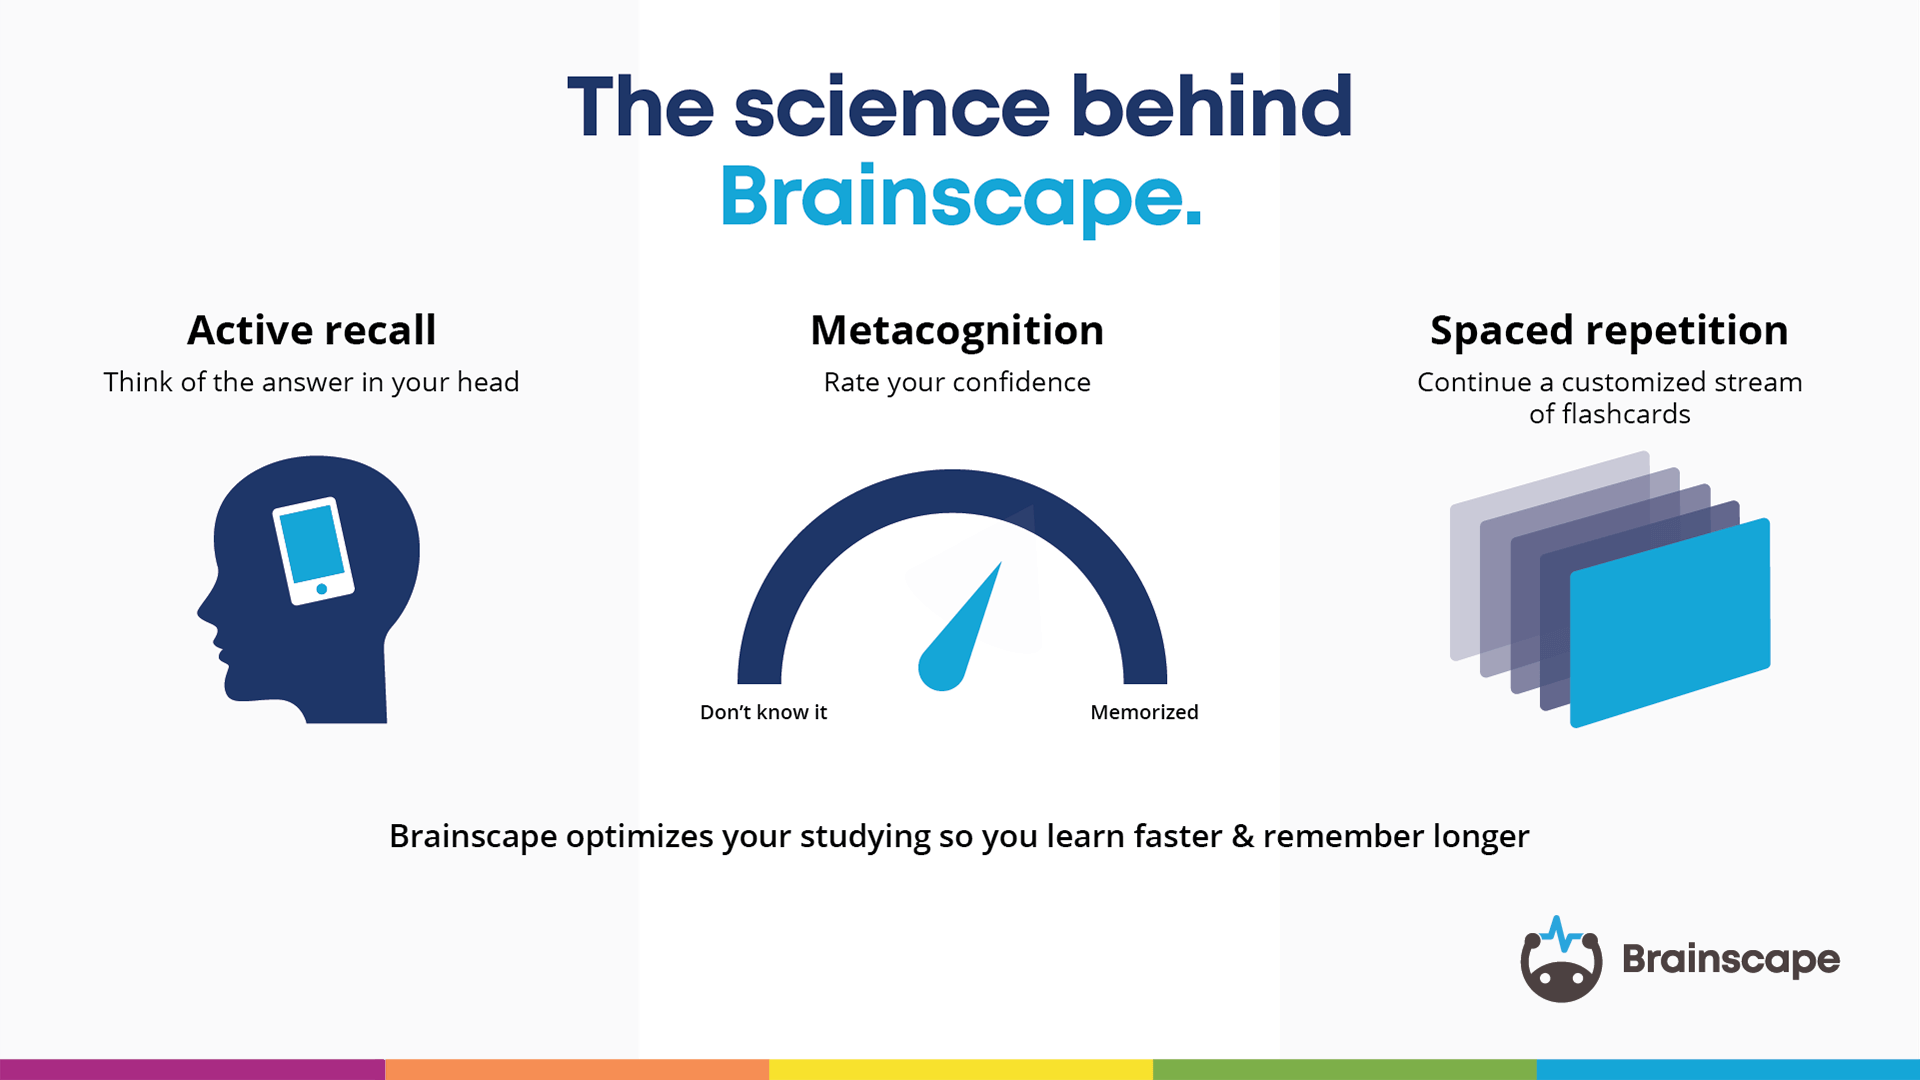 Make flashcards with Brainscape